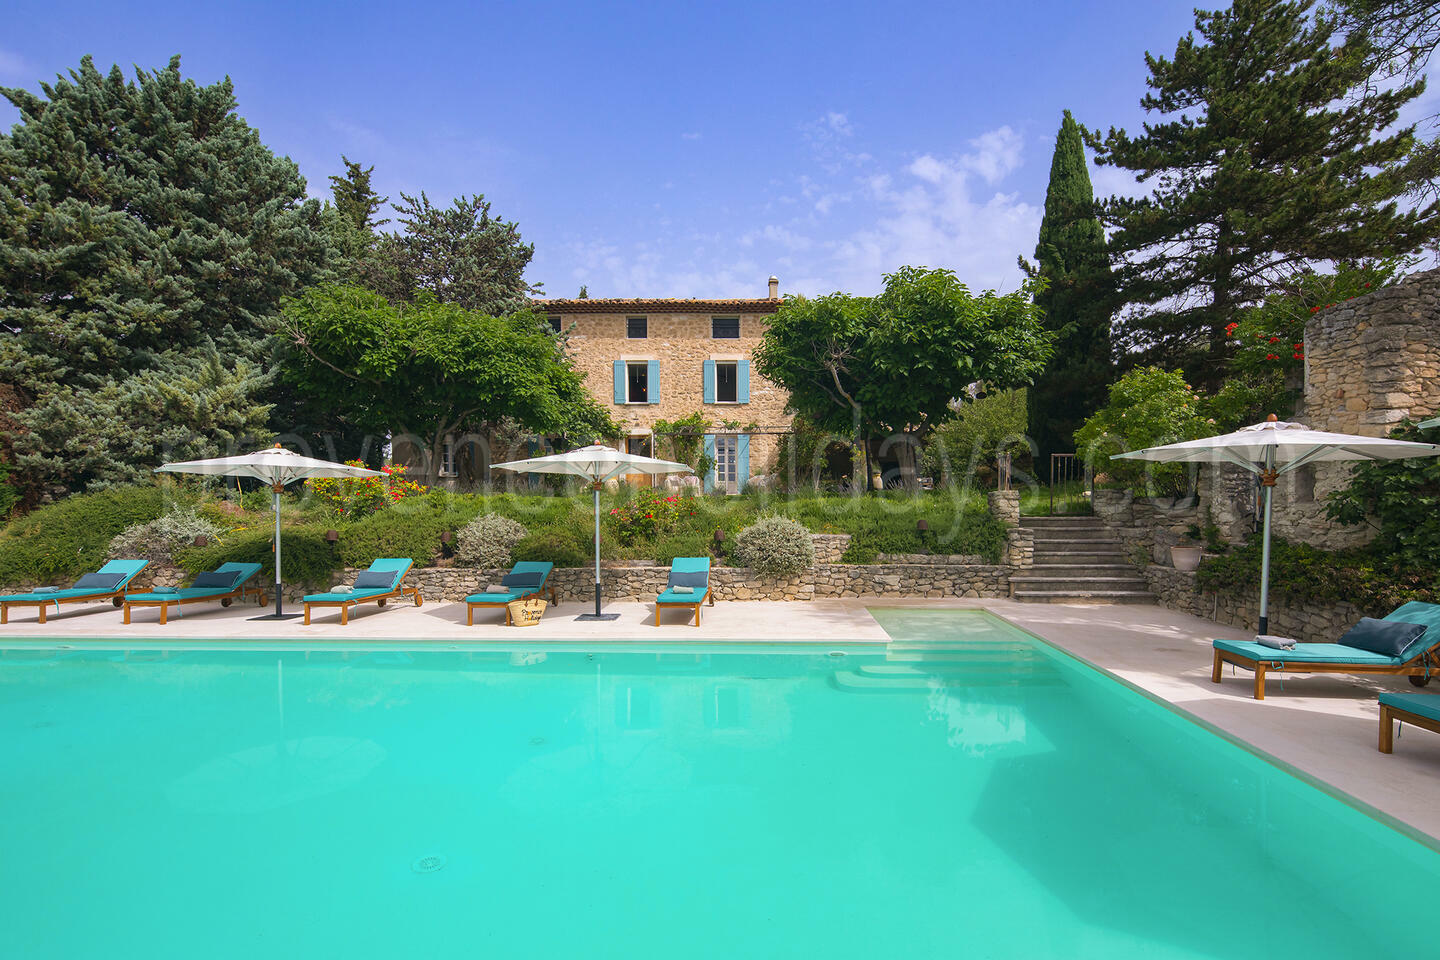 Secluded Villa with Infinity Pool near the Mont Ventoux 1 - Villa Dahlia: Villa: Pool